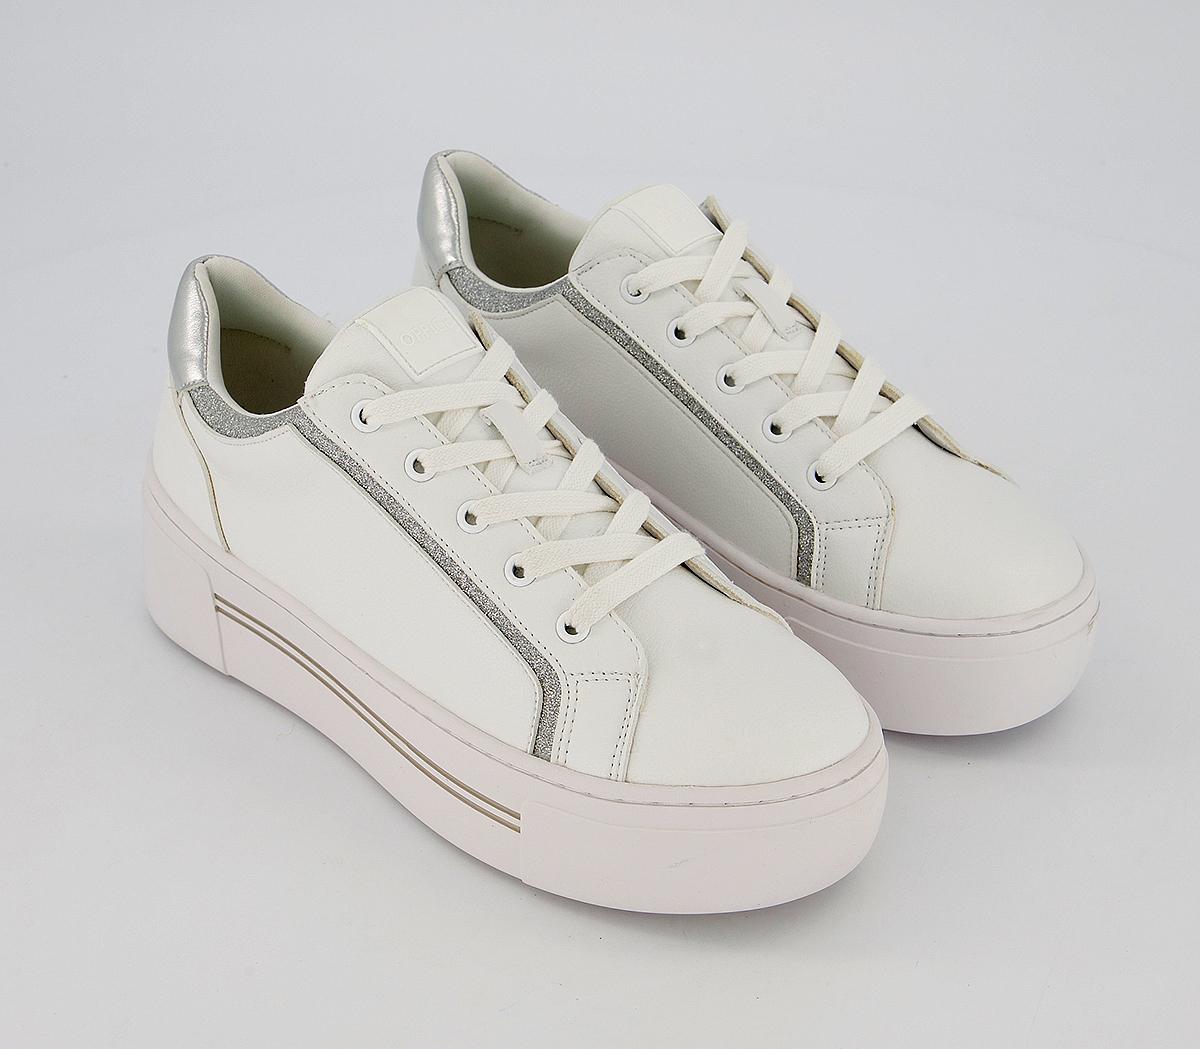 OFFICE Fhantom Flatform Lace Up Trainers White Silver Glitter - Flat ...